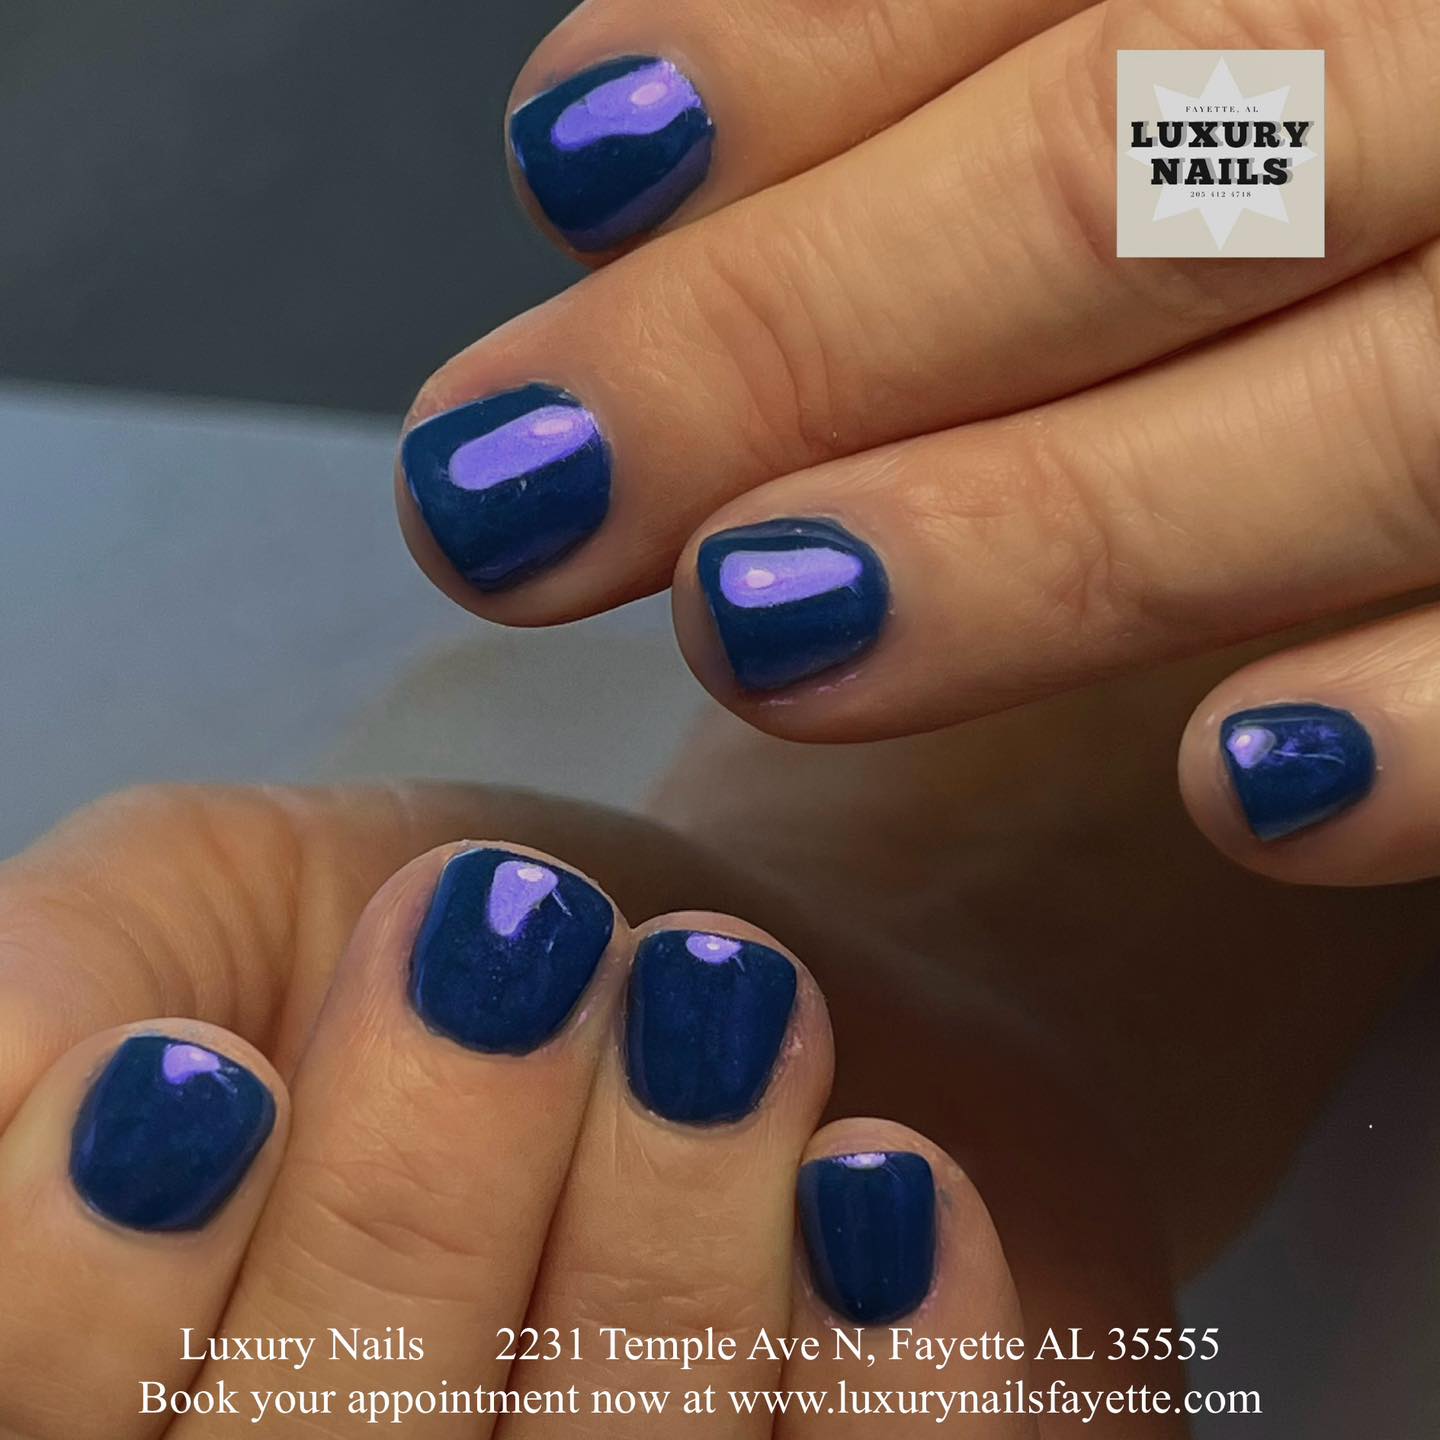 Luxury Nails 2231 Temple Ave N, Fayette Alabama 35555